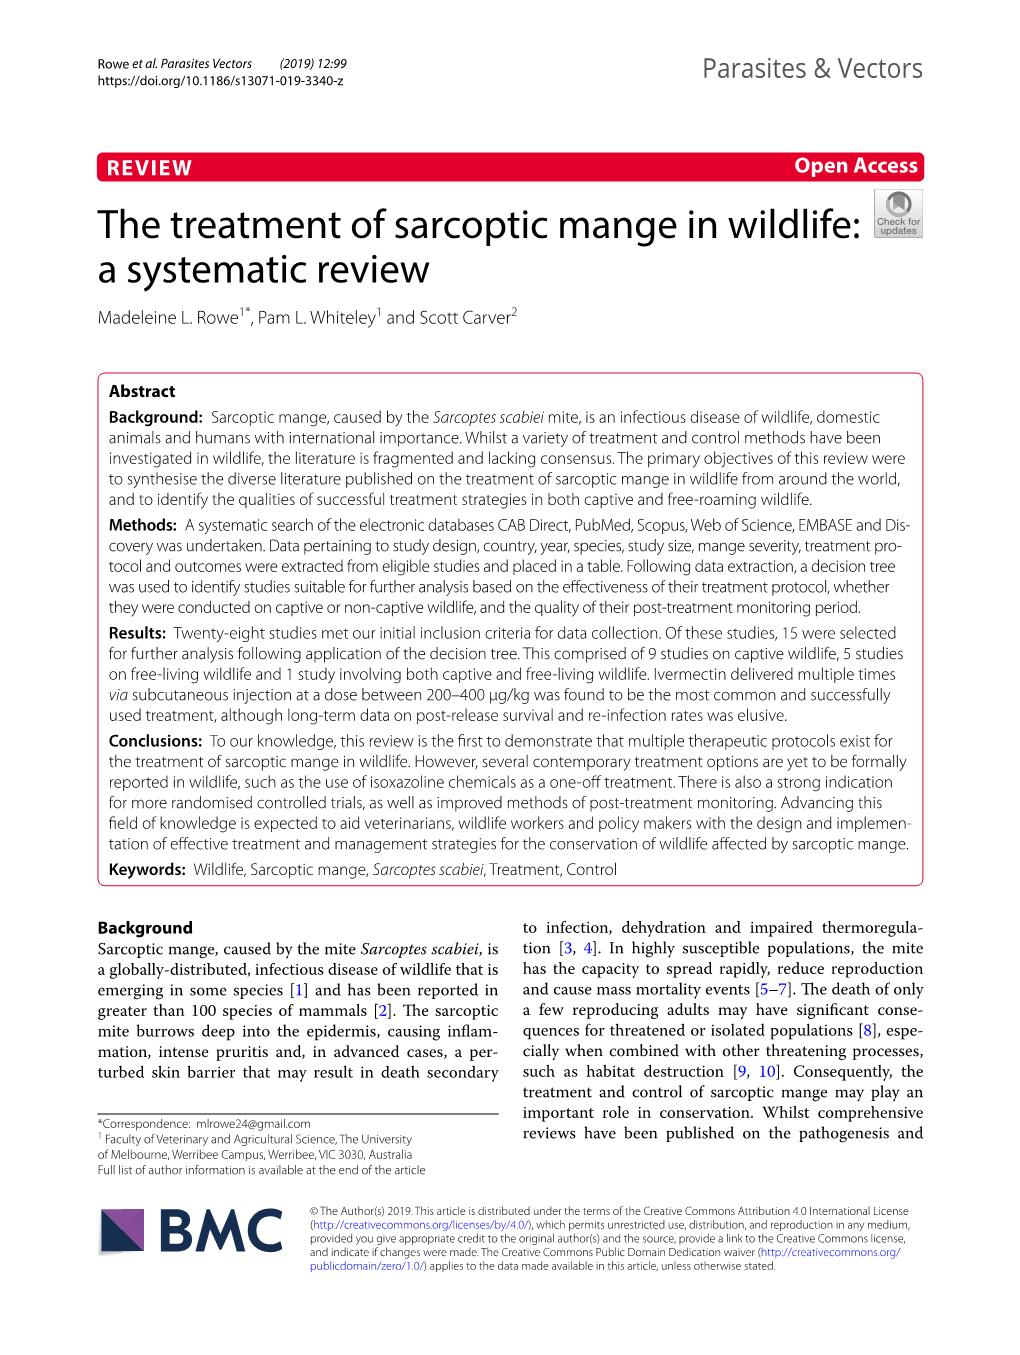 The Treatment of Sarcoptic Mange in Wildlife: a Systematic Review Madeleine L